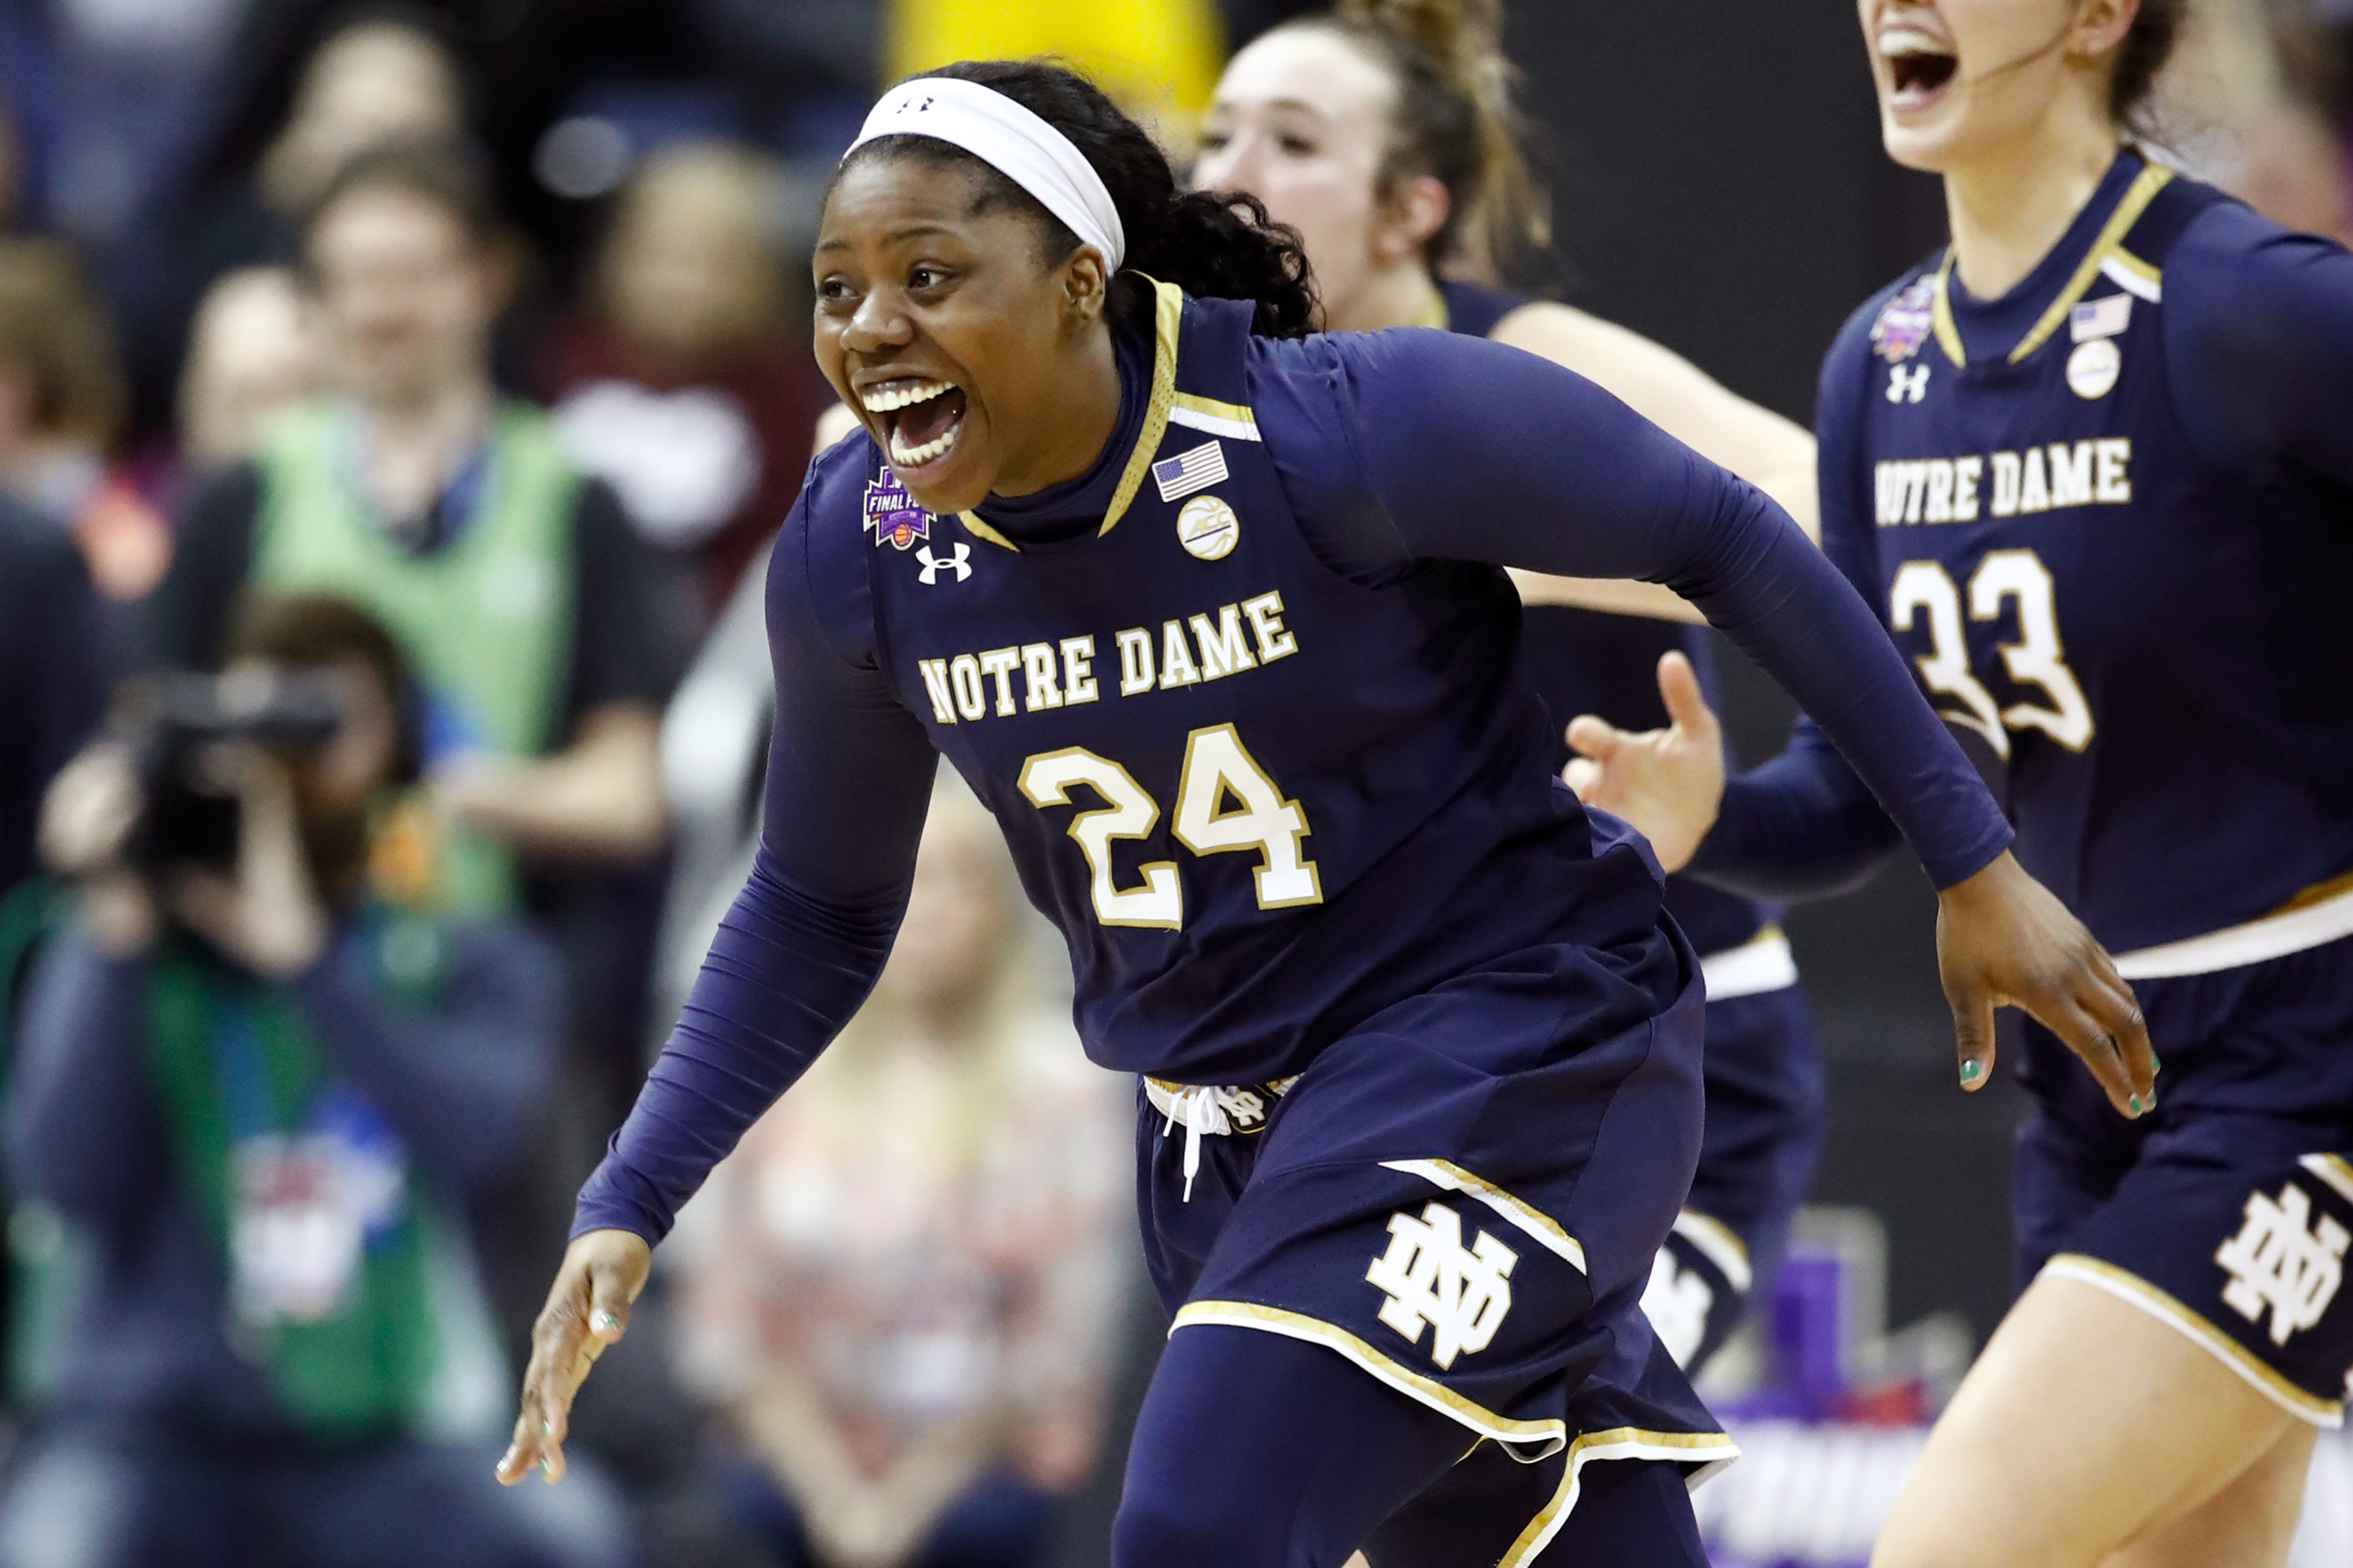 Arike Ogunbowale of the Notre Dame Fighting Irish celebrates after scoring the game winning basket with 0.1 seconds remaining in the fourth quarter to defeat the Mississippi State Lady Bulldogs in the championship game of the 2018 NCAA Women's Final Four at Nationwide Arena on April 1, 2018 in Columbus, Ohio. T (Andy Lyons&mdash;Getty Images)